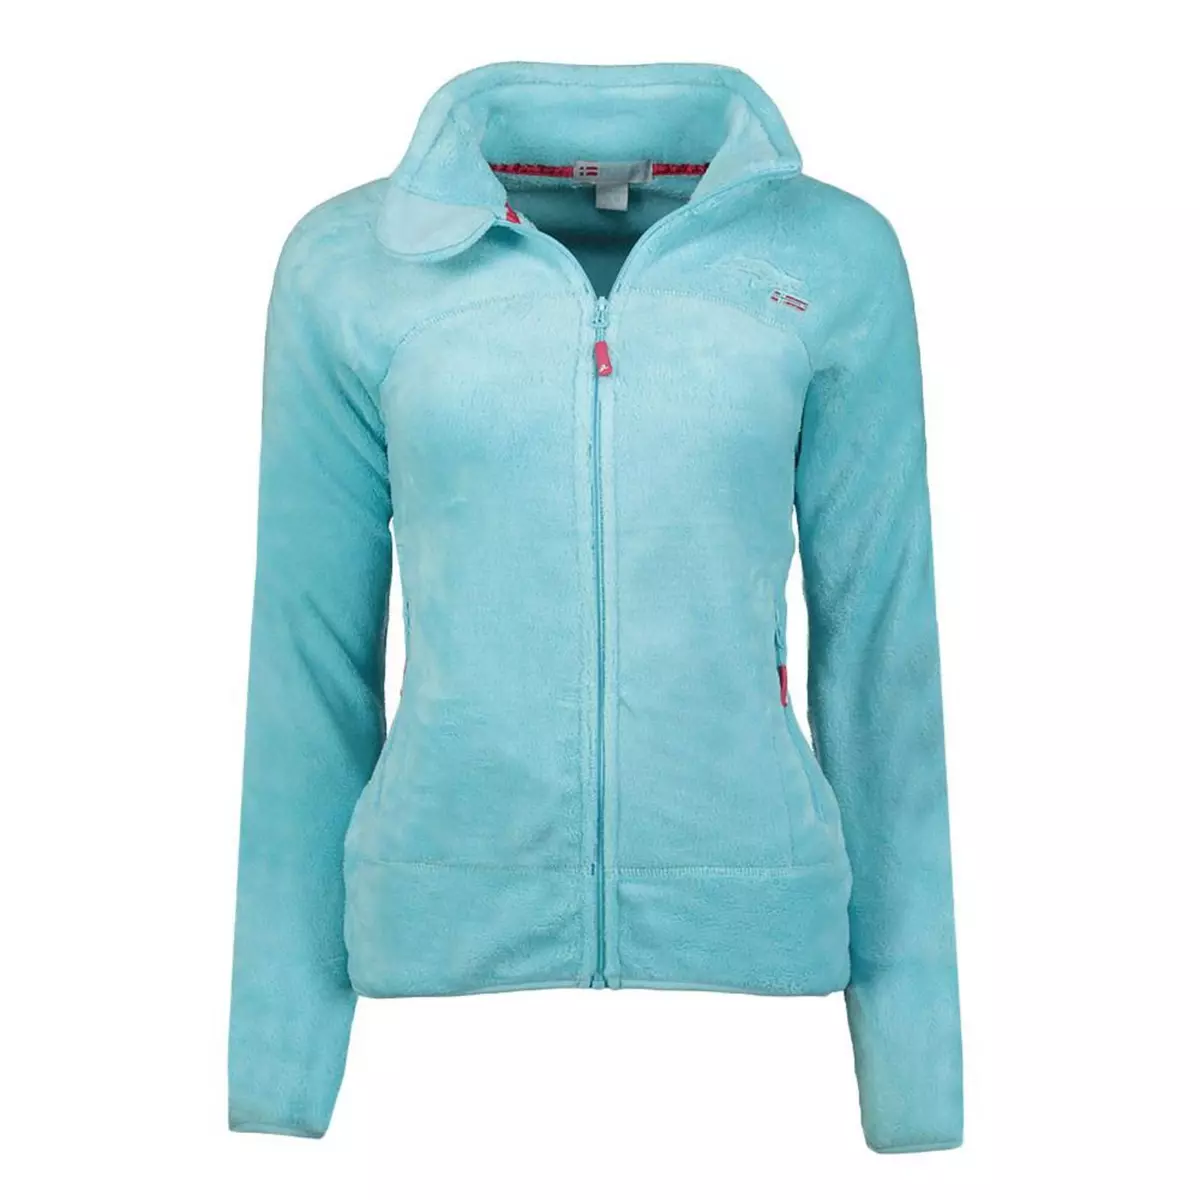 GEOGRAPHICAL NORWAY Veste polaire Turquoise Femme Geographical Norway Upaline